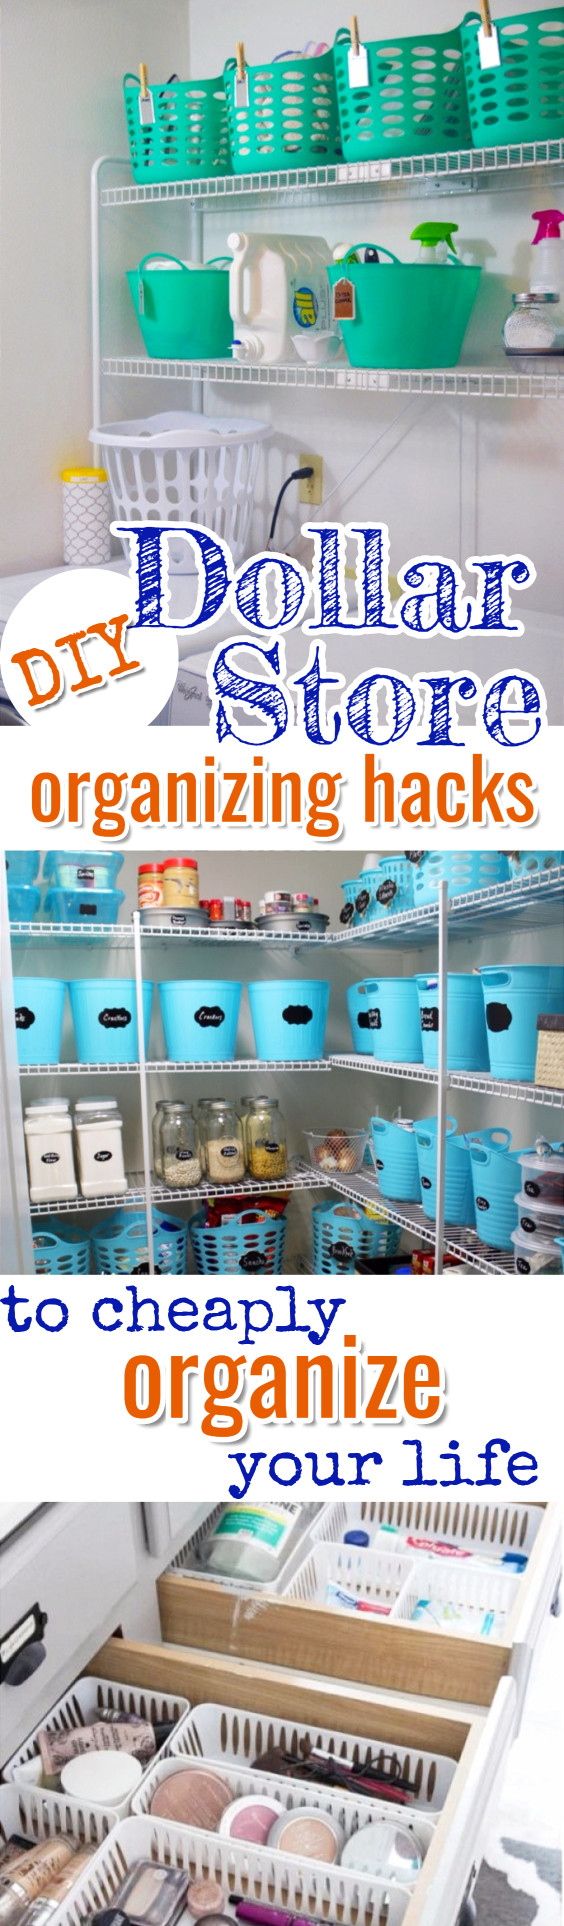 Dollar Store Organizing on a Budget - Cheap organizing ideas from dollar stores